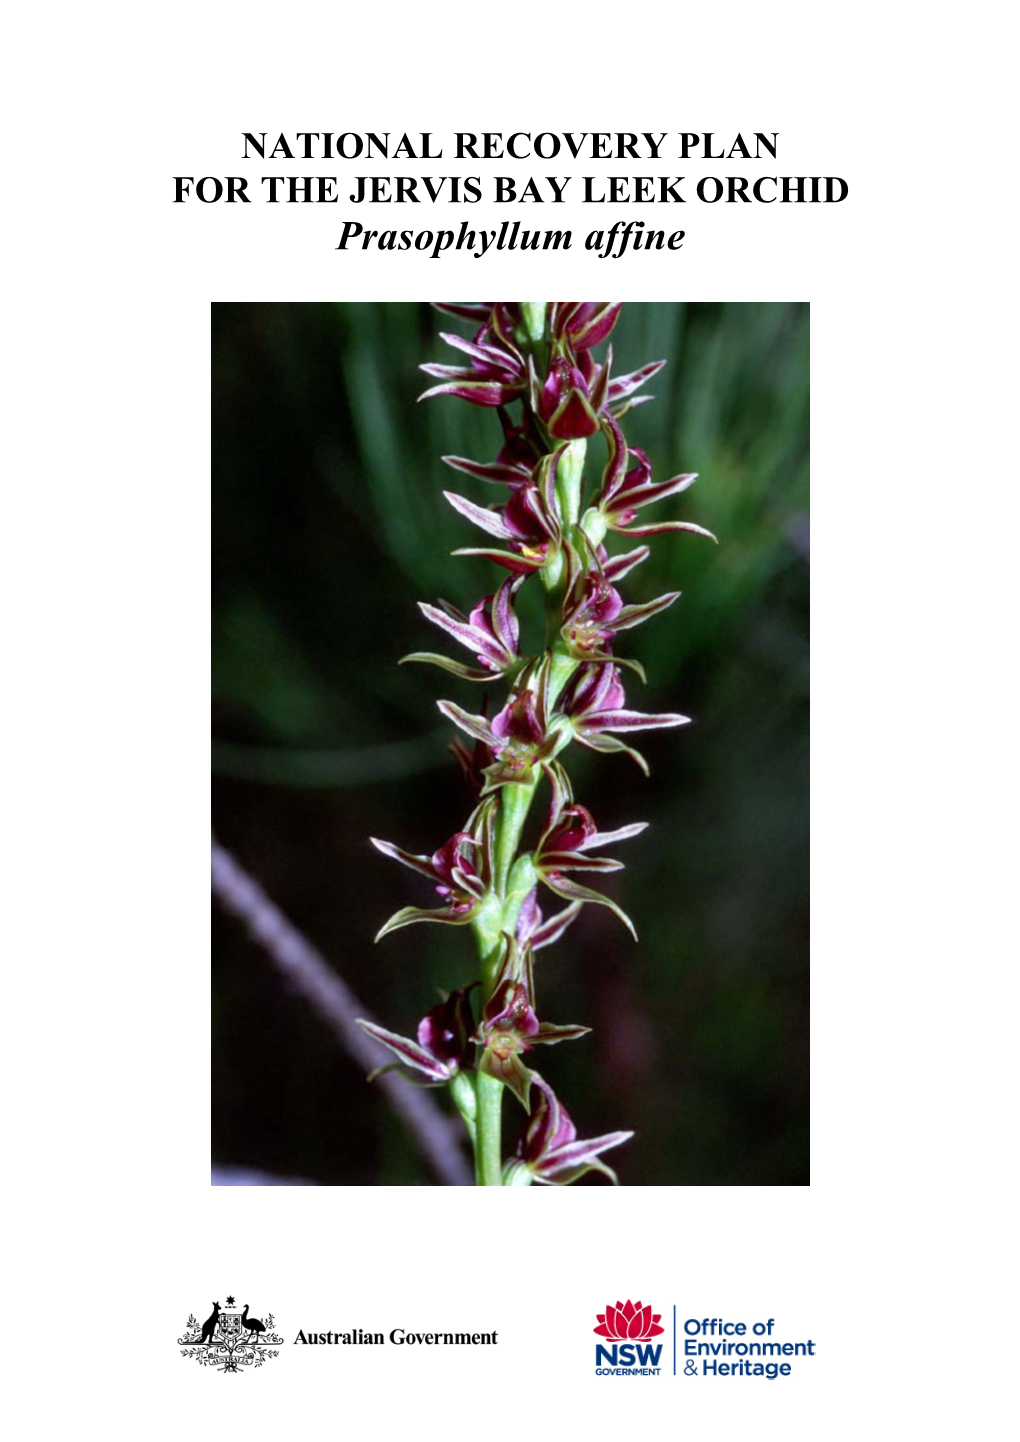 NATIONAL RECOVERY PLAN for the JERVIS BAY LEEK ORCHID Prasophyllum Affine